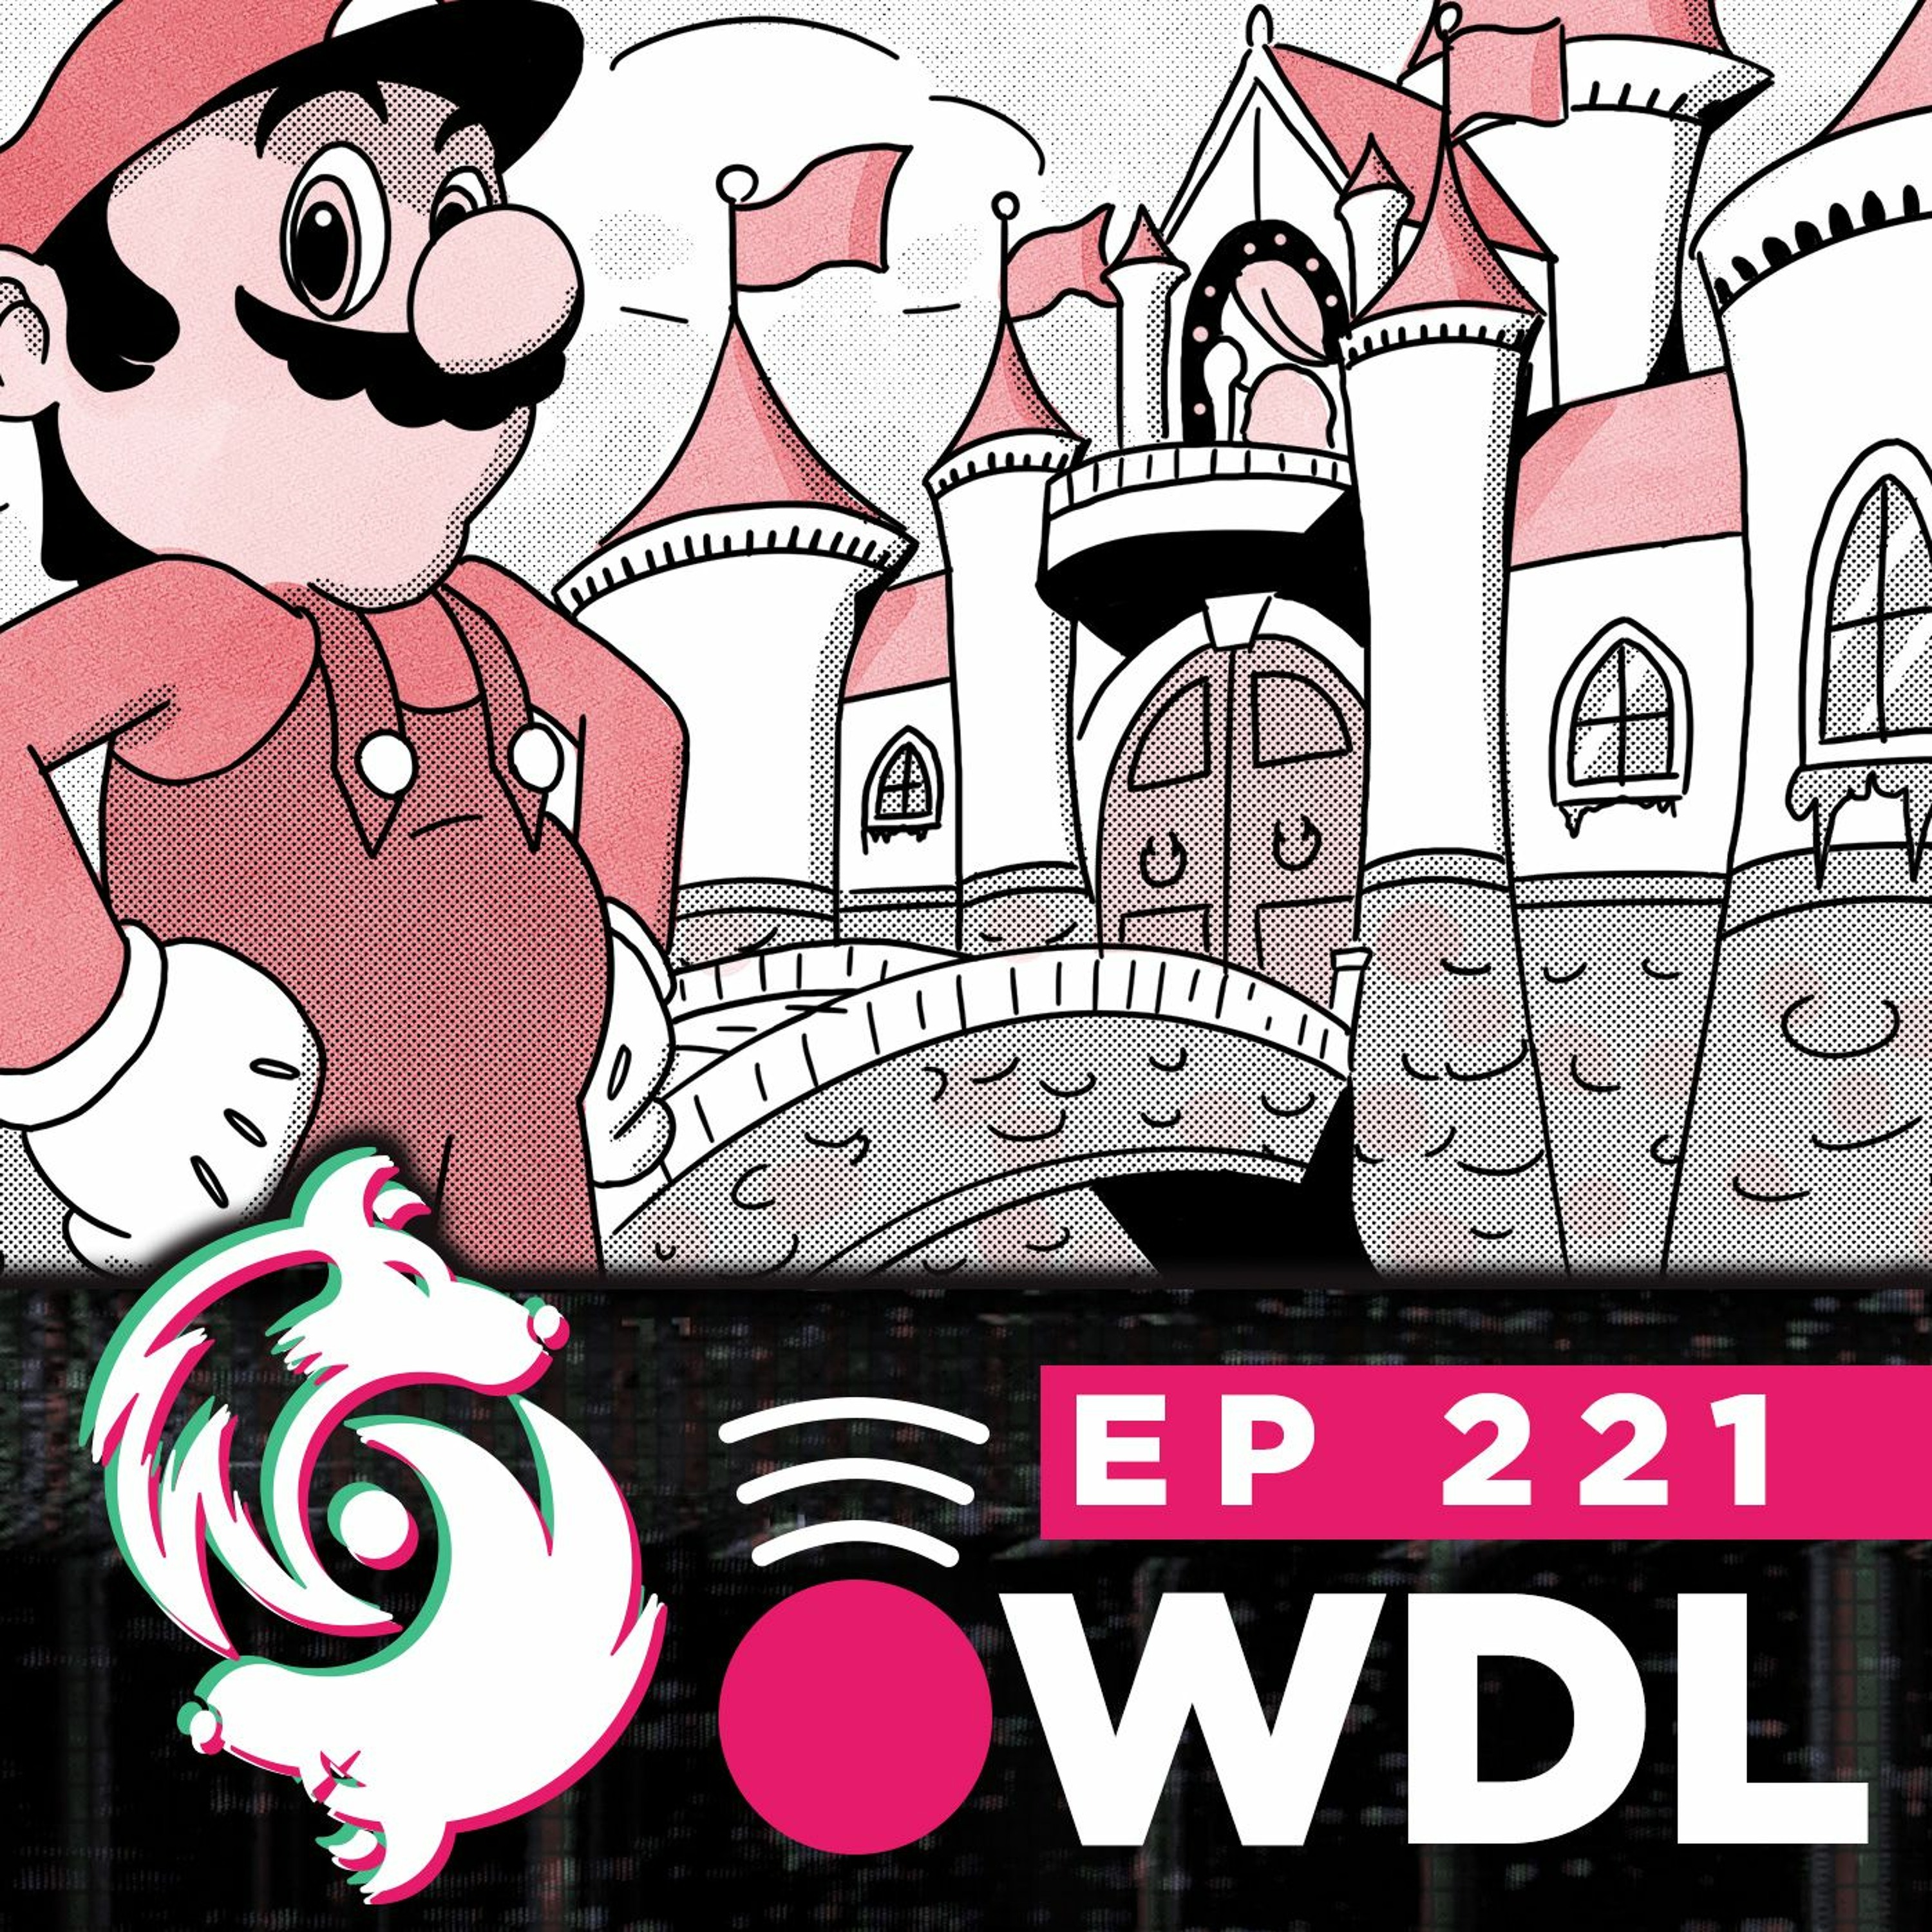 Mario games are happening - WDL Ep 221